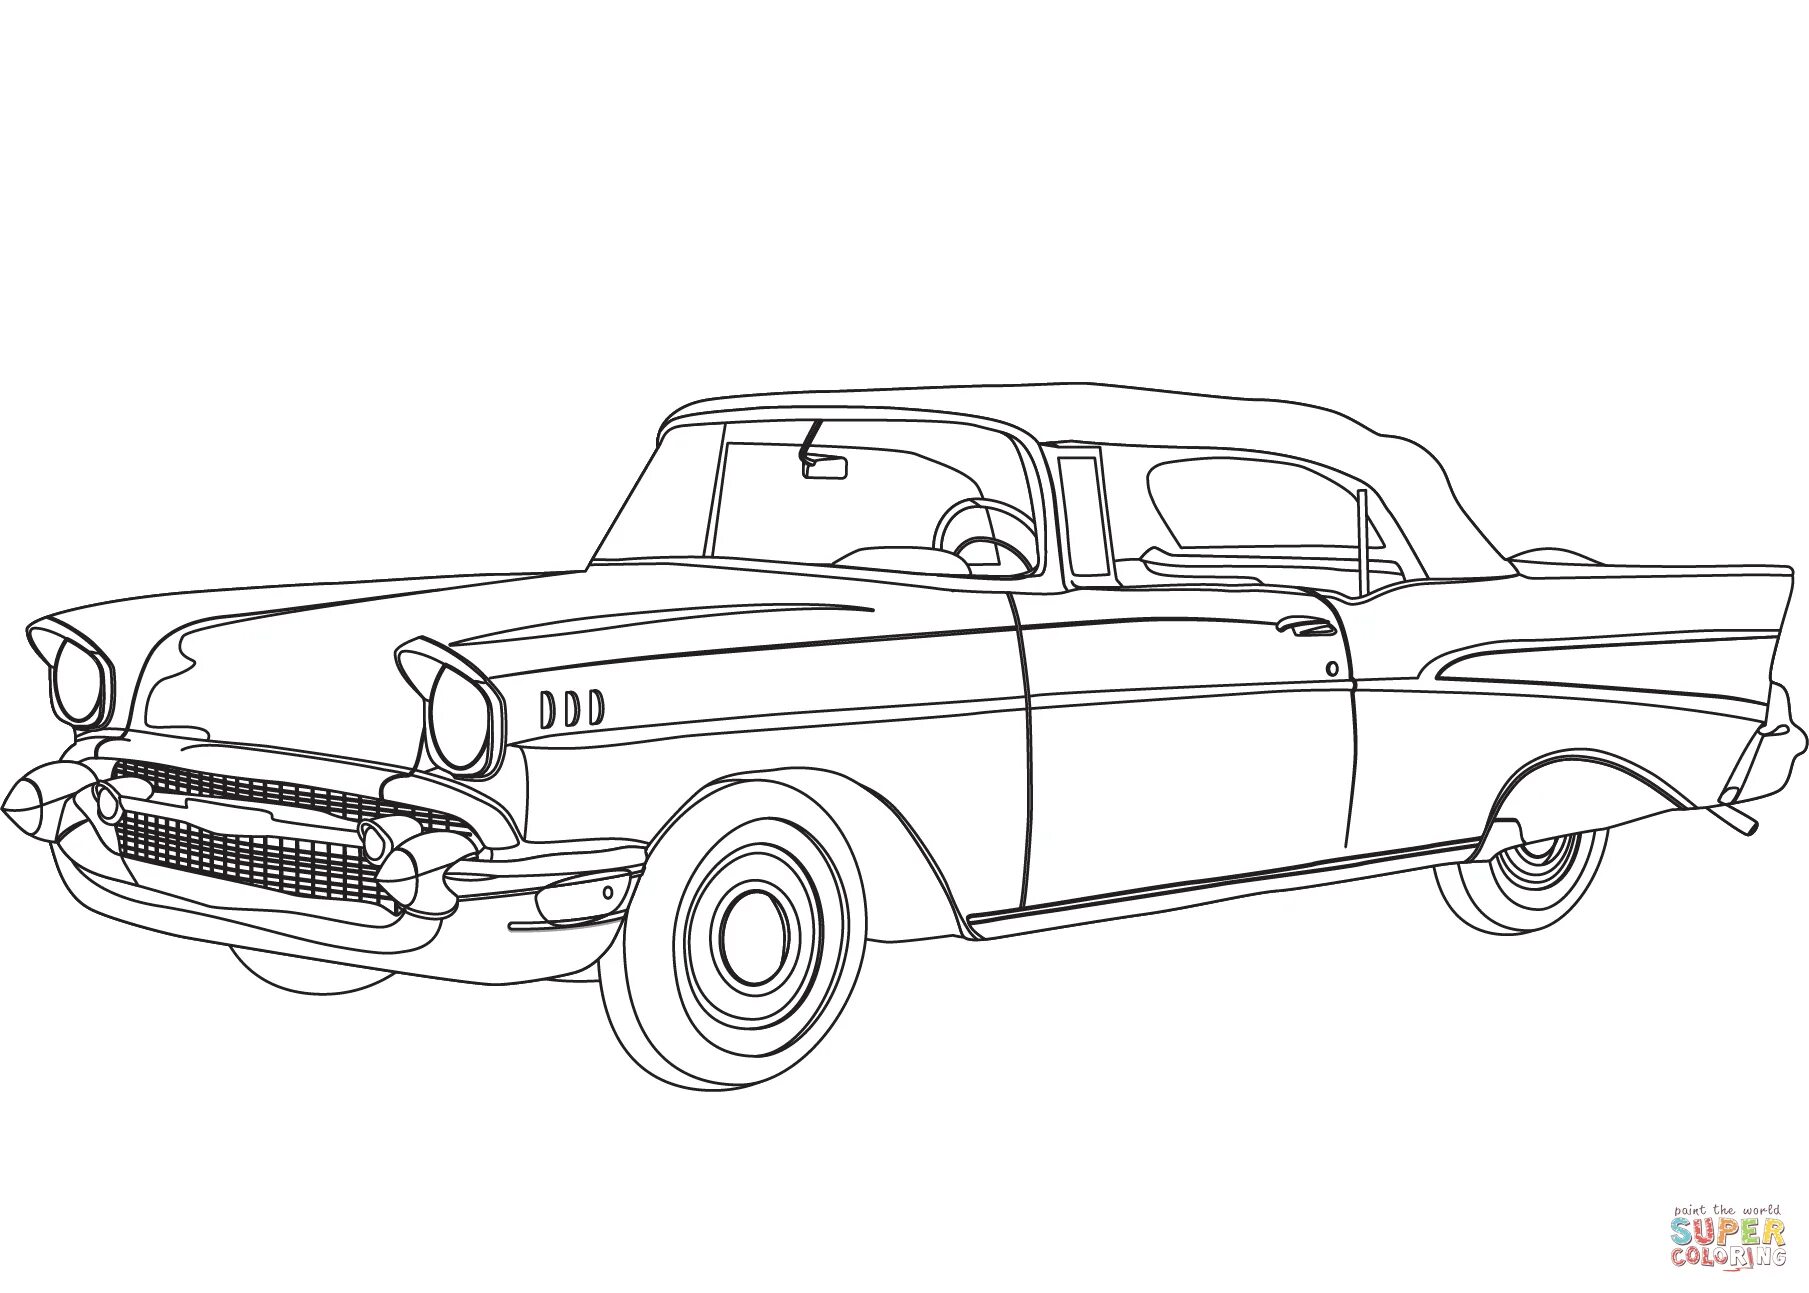 Charming limousine coloring pages for kids